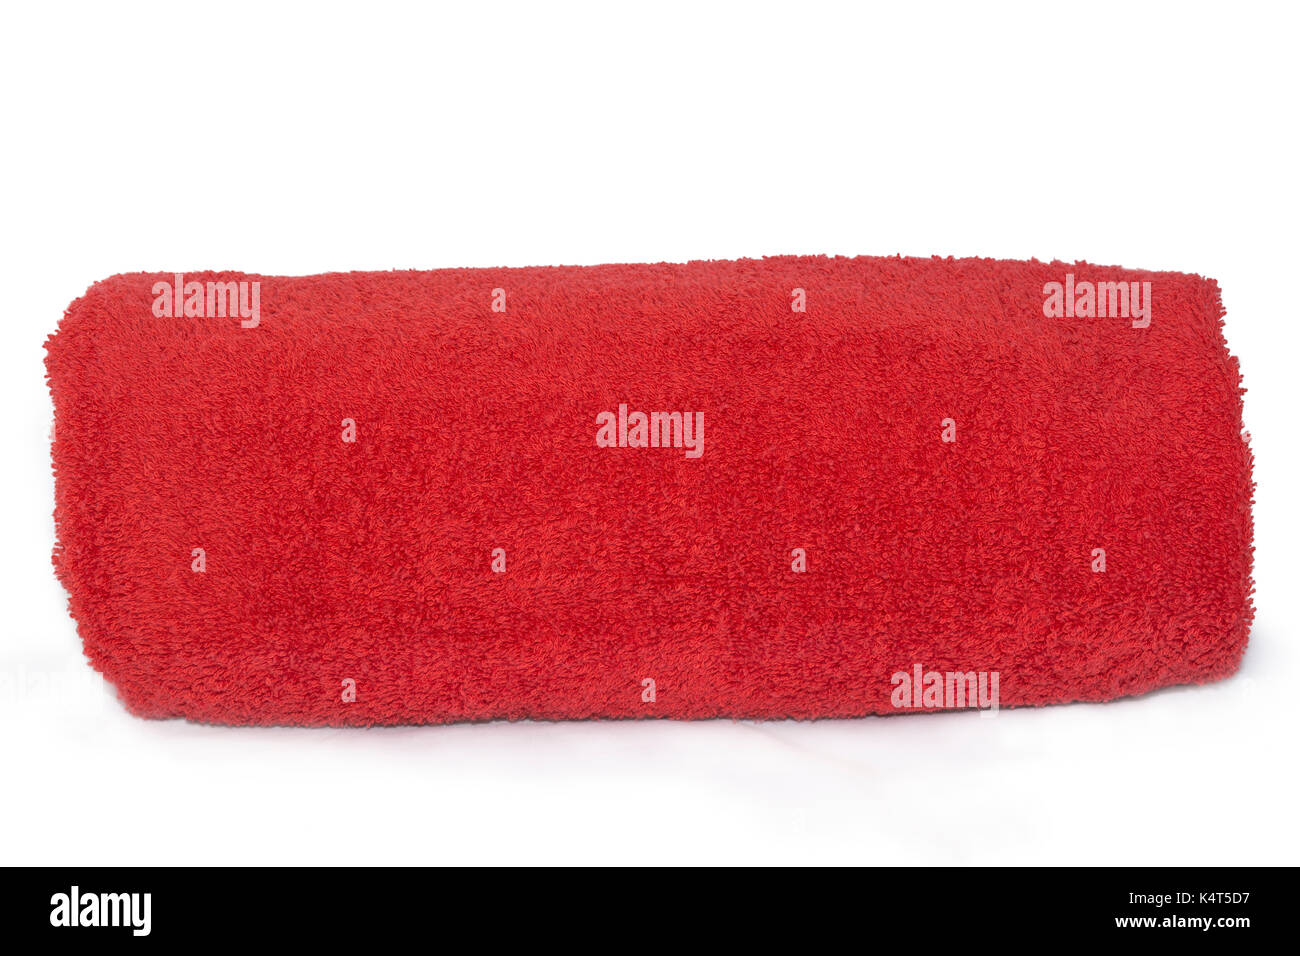 Red single towel rolled up against a plain white and isolating background. Stock Photo